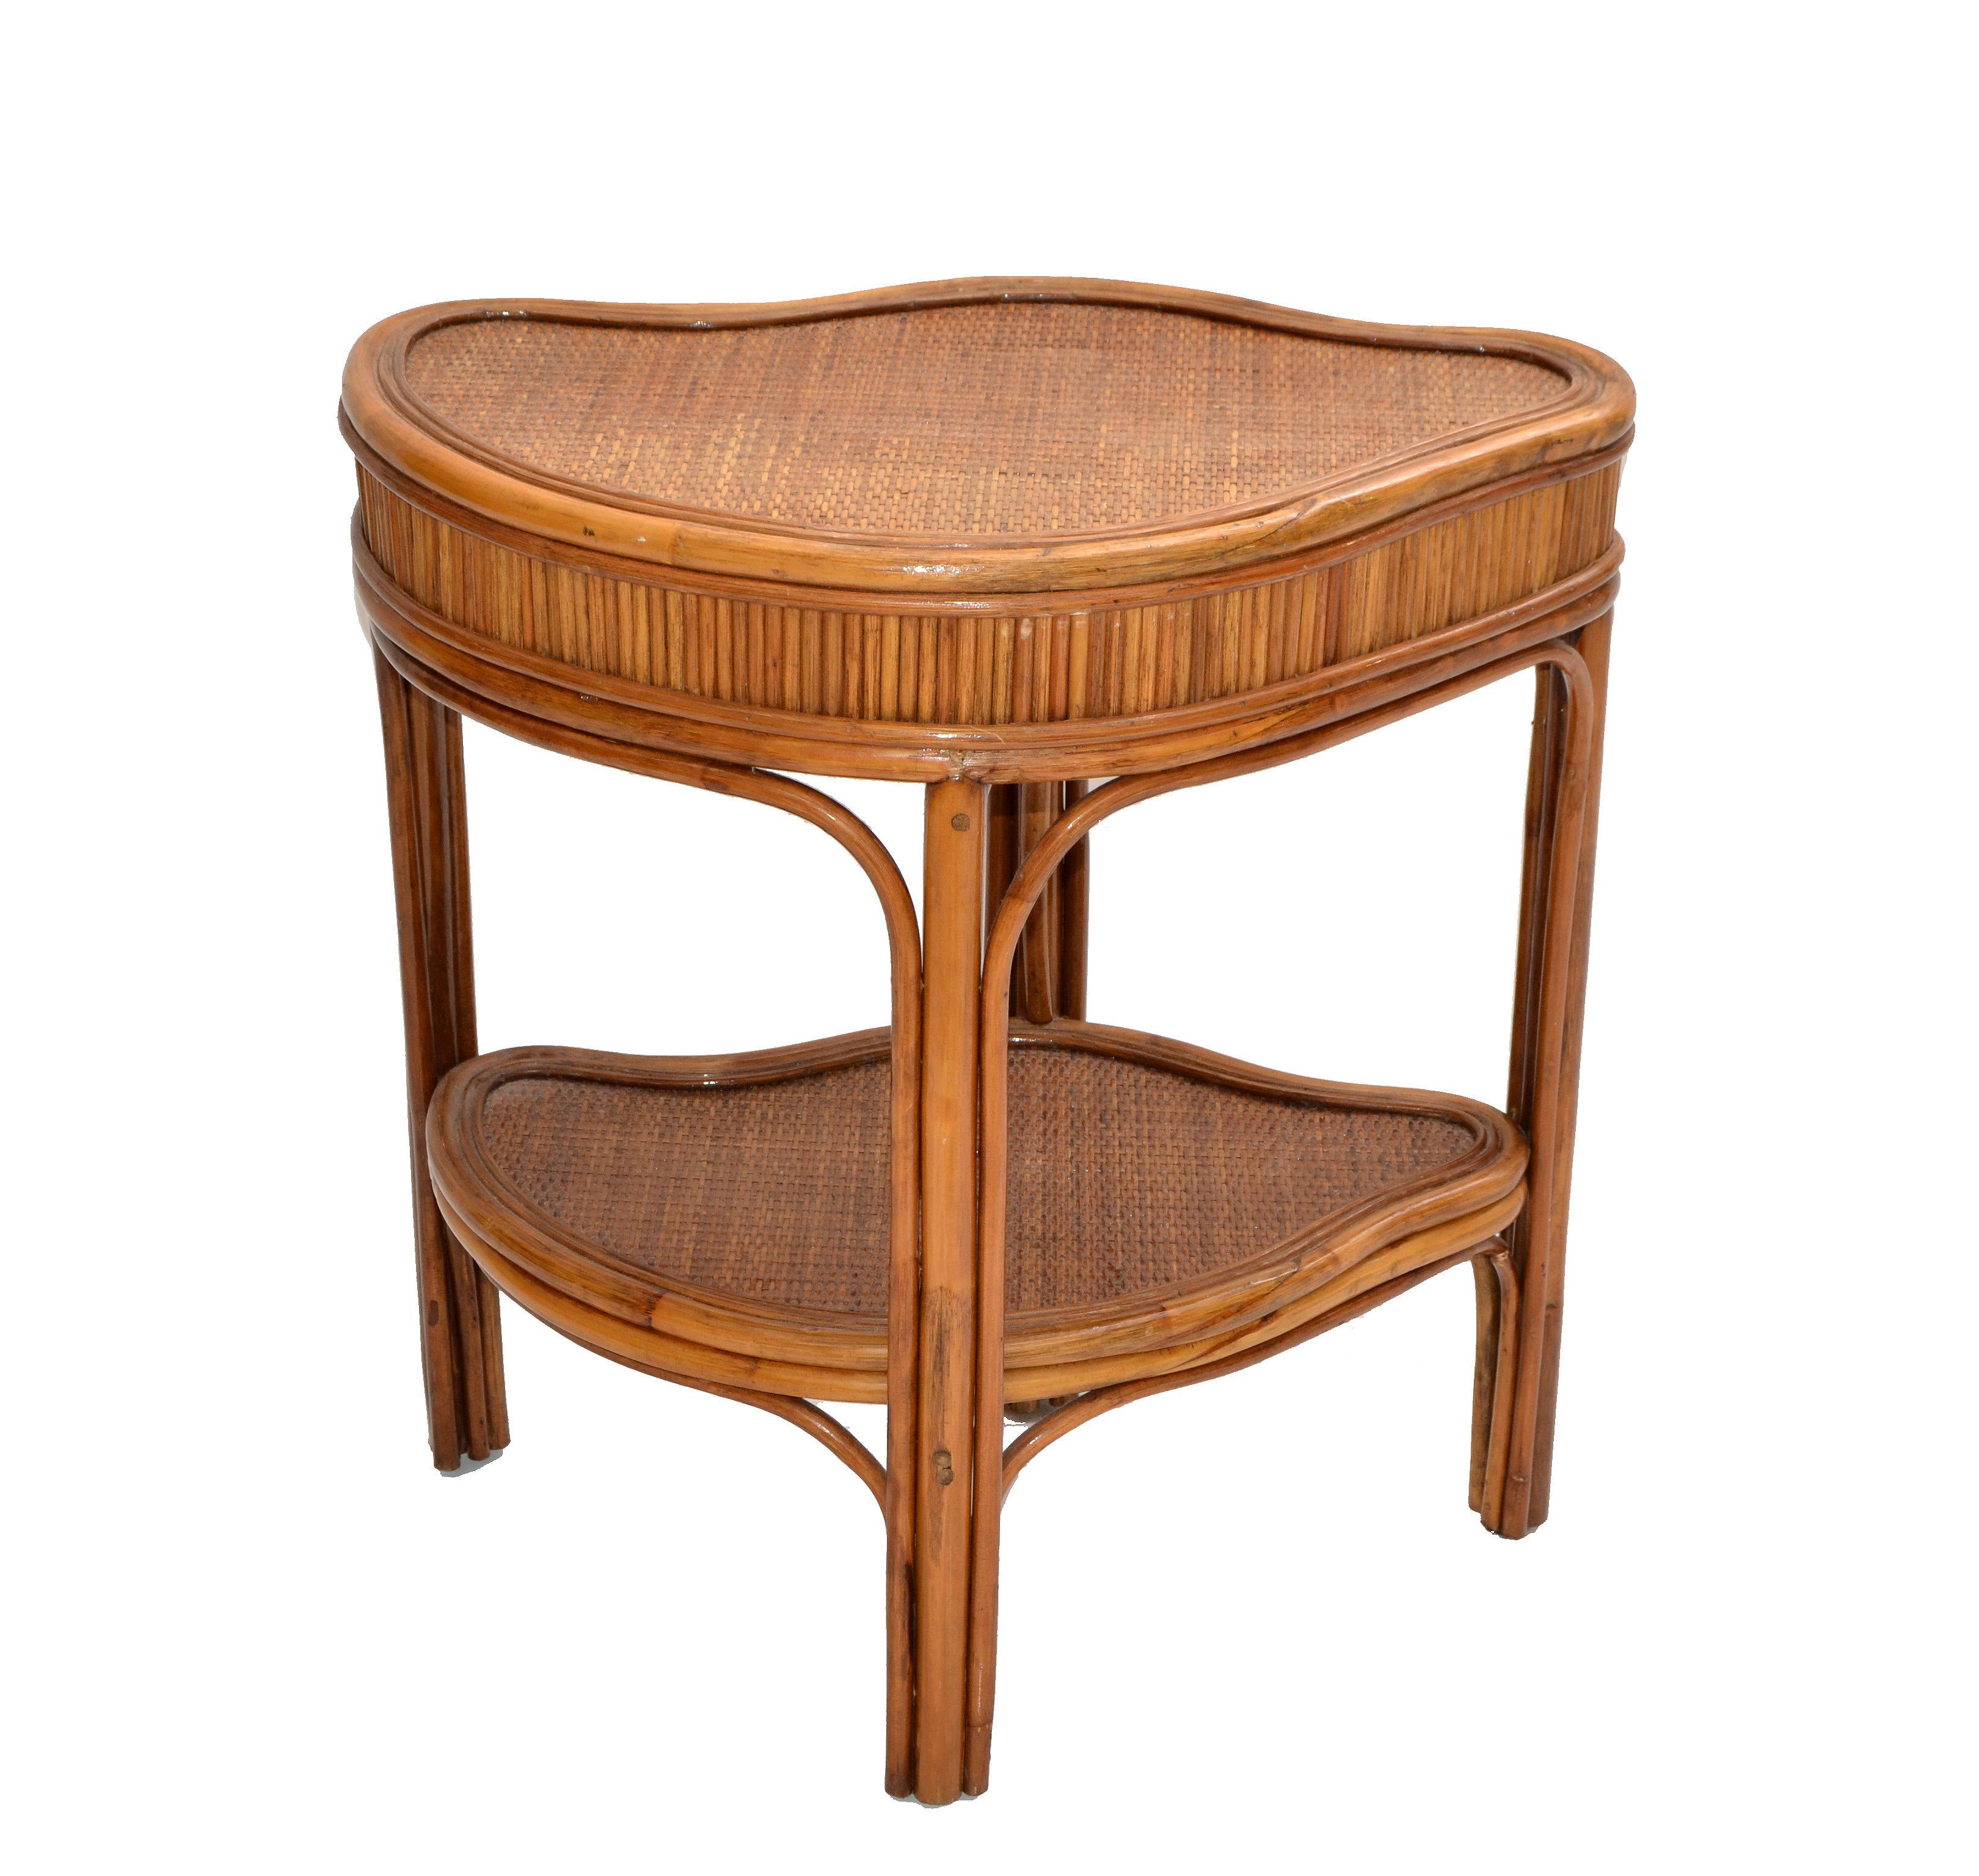 Vintage Chinoiserie bamboo and rattan handmade two-tier side table, end table in Asian Modern style.
  